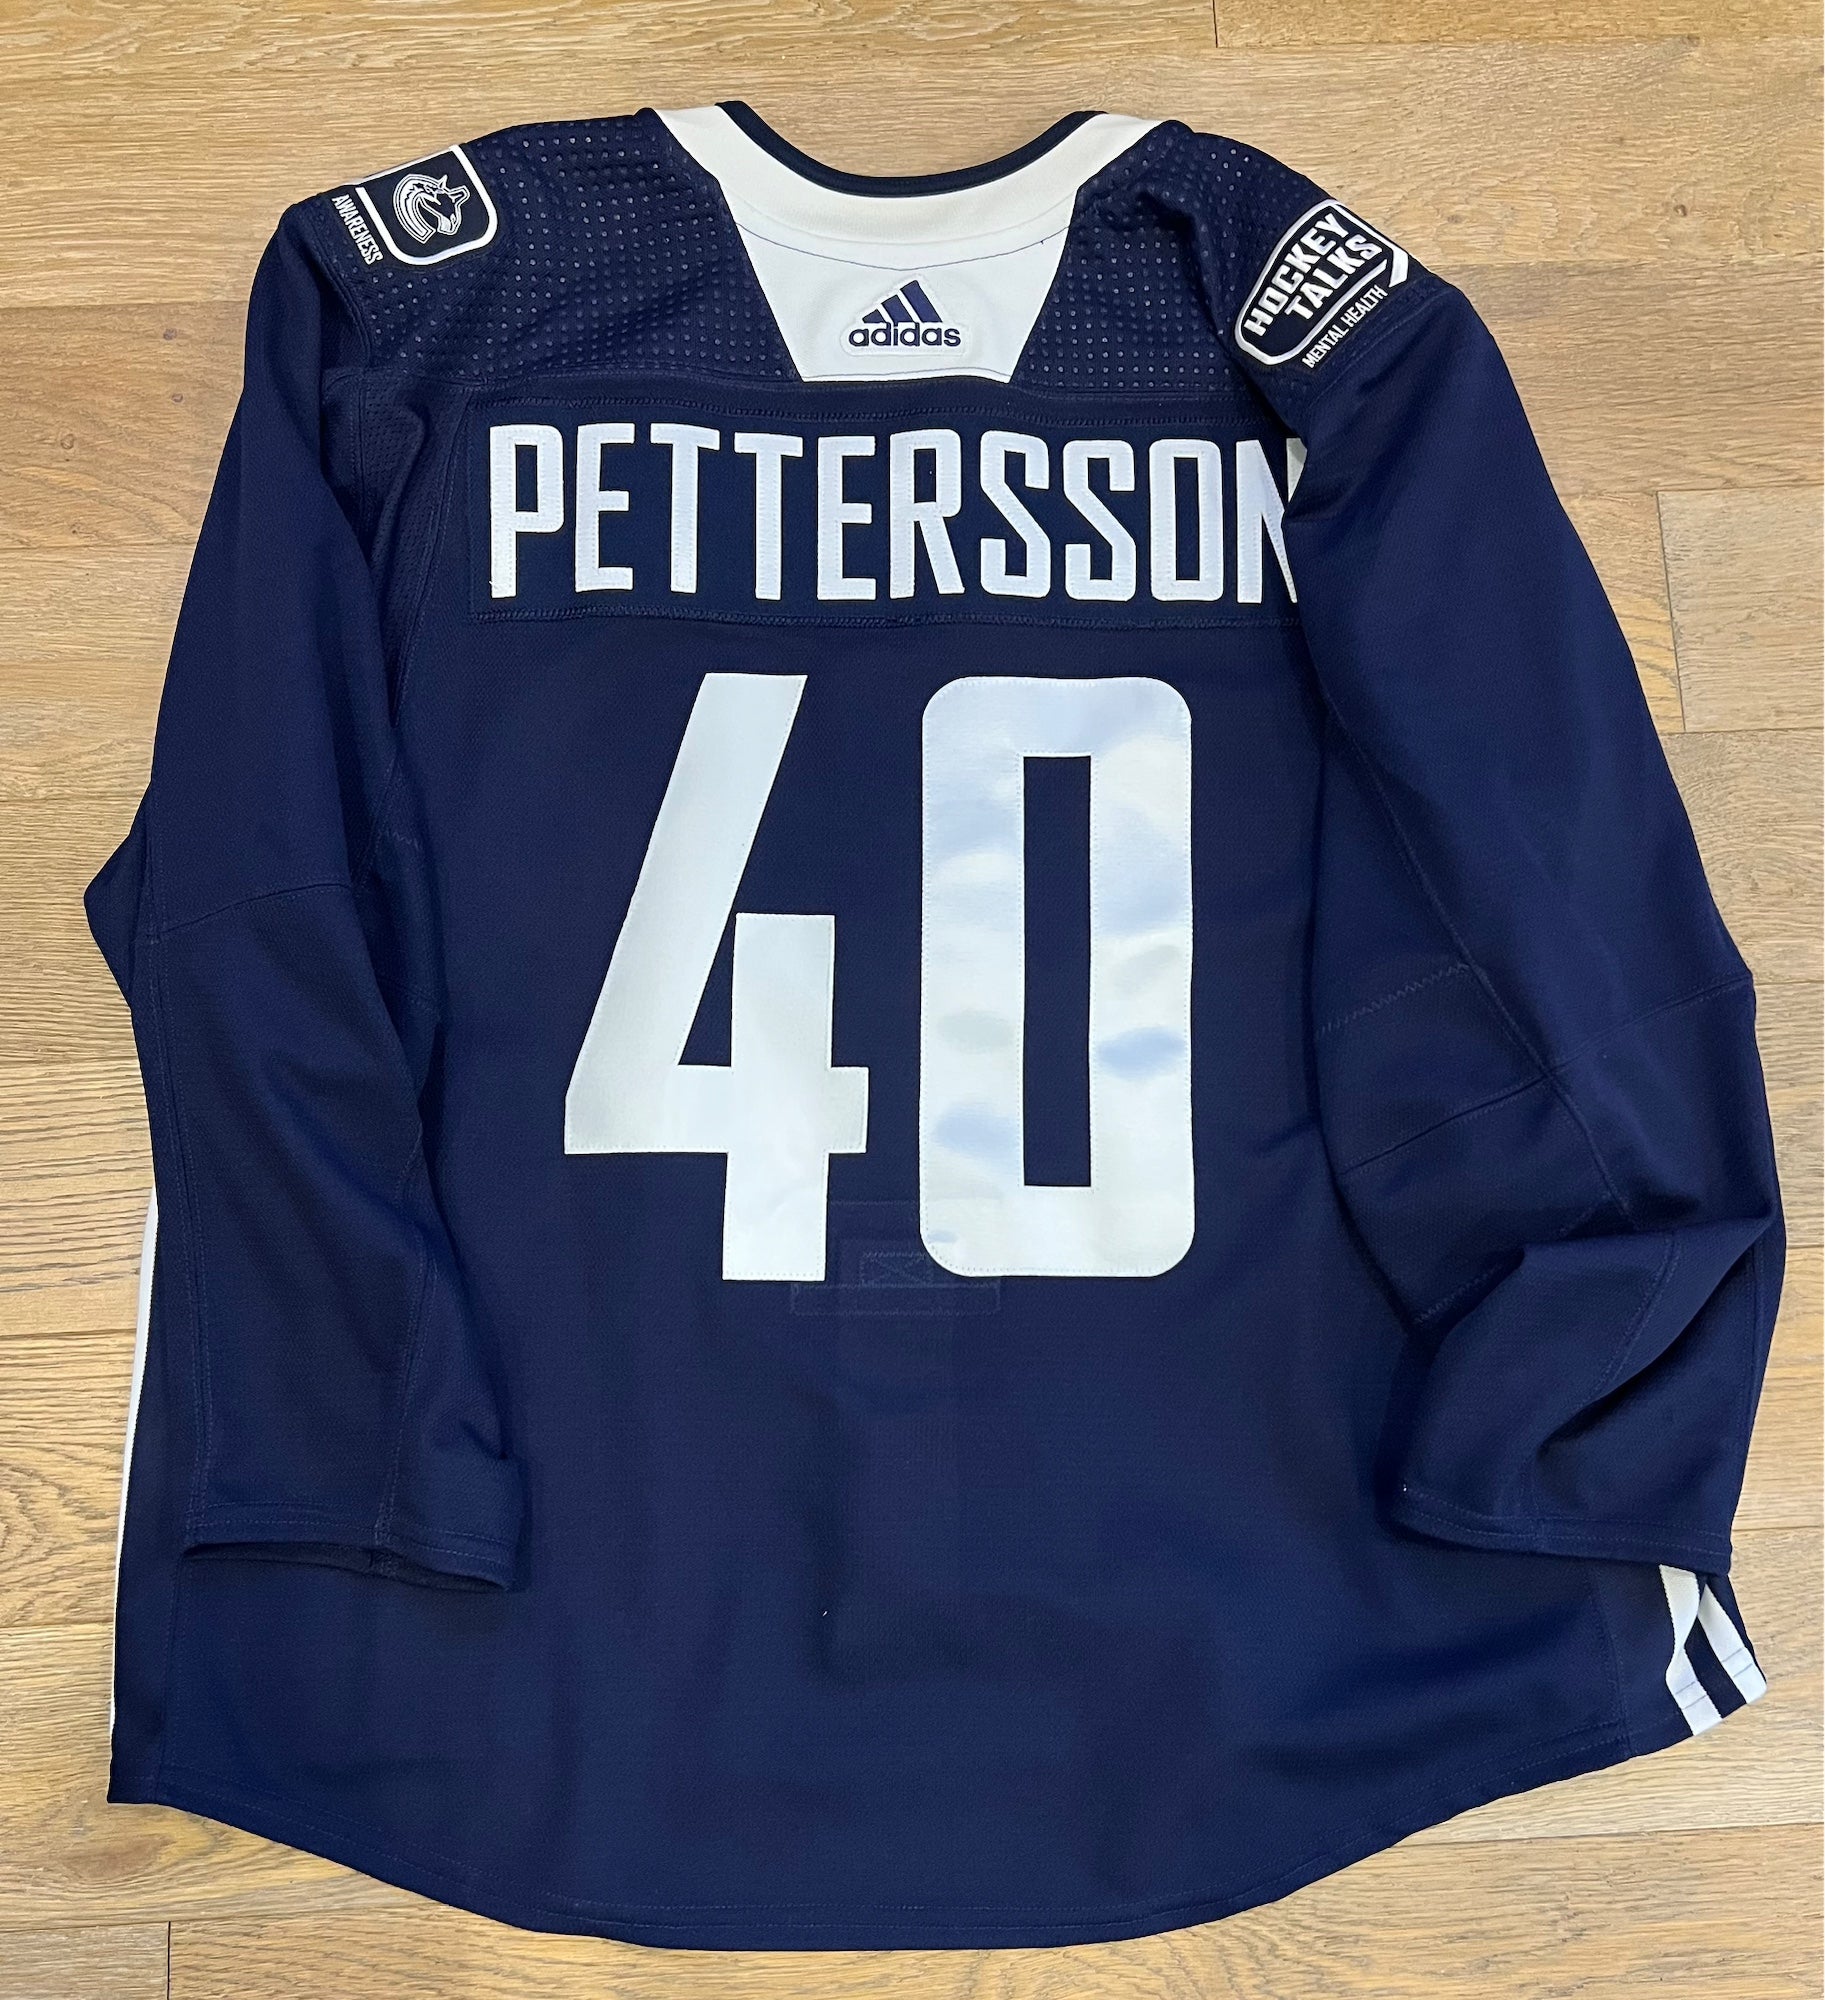 pettersson all star jersey